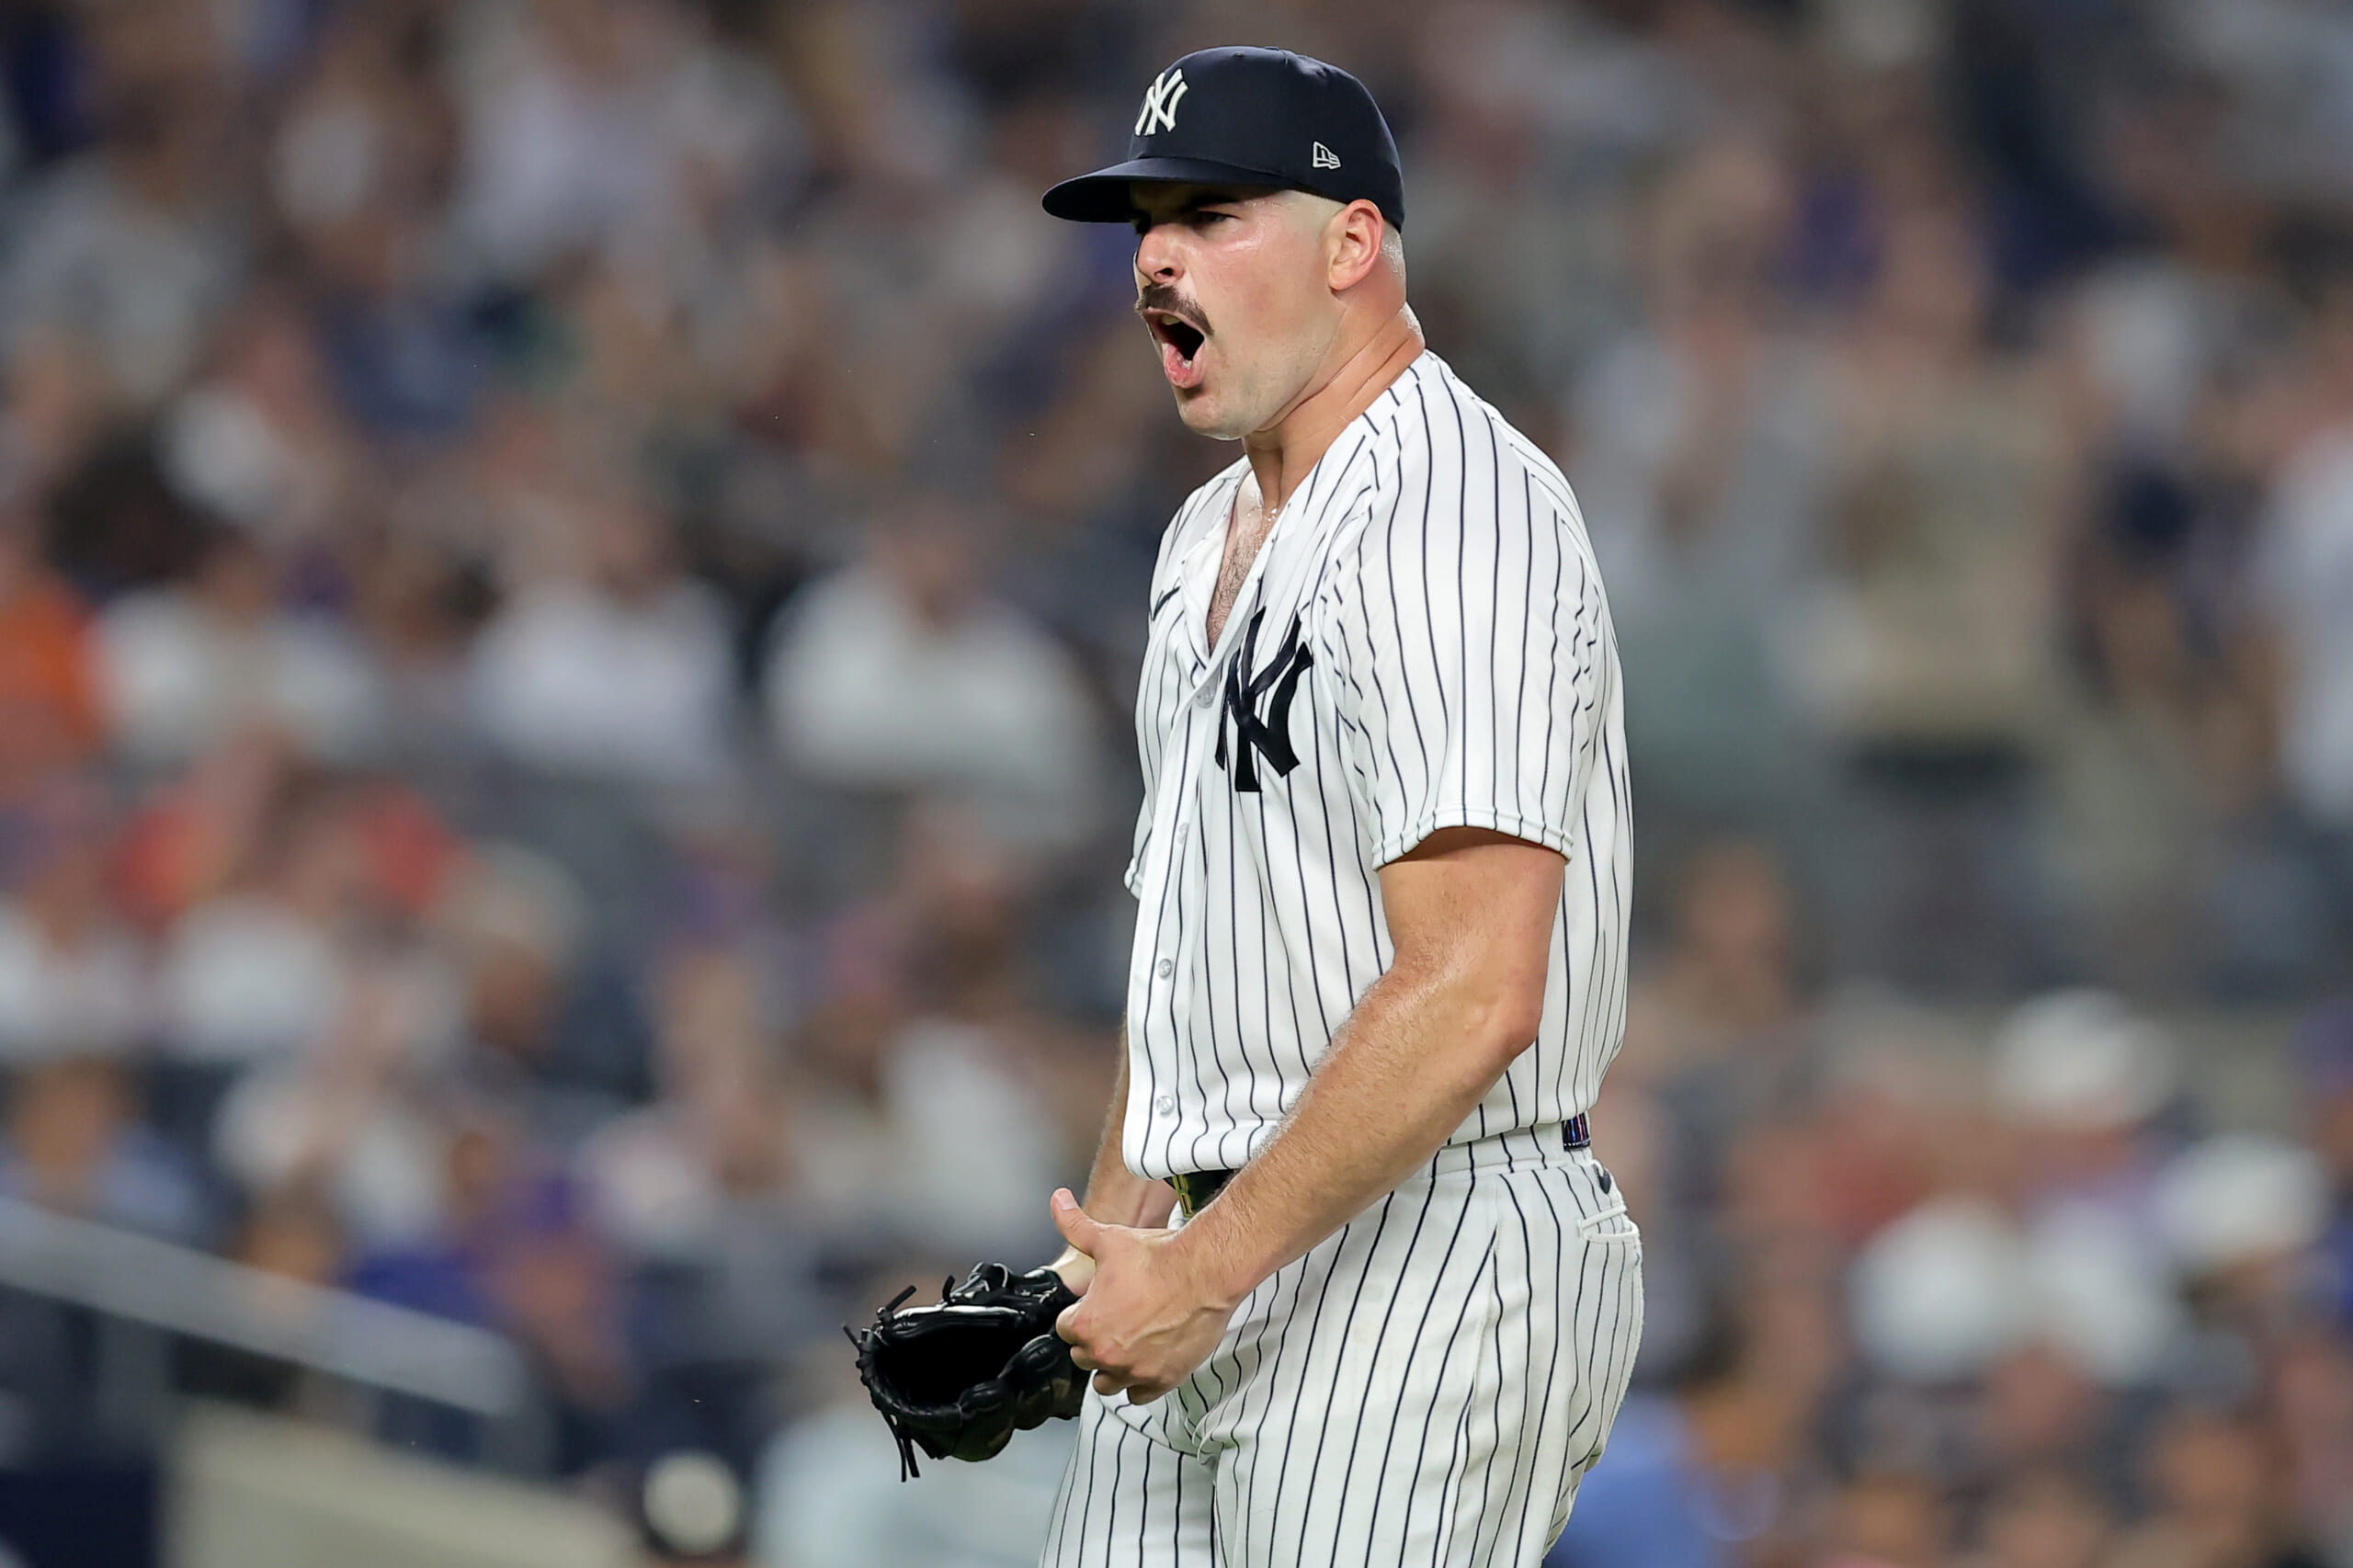 Yankees lefthander Carlos Rodon goes back on IL with hamstring